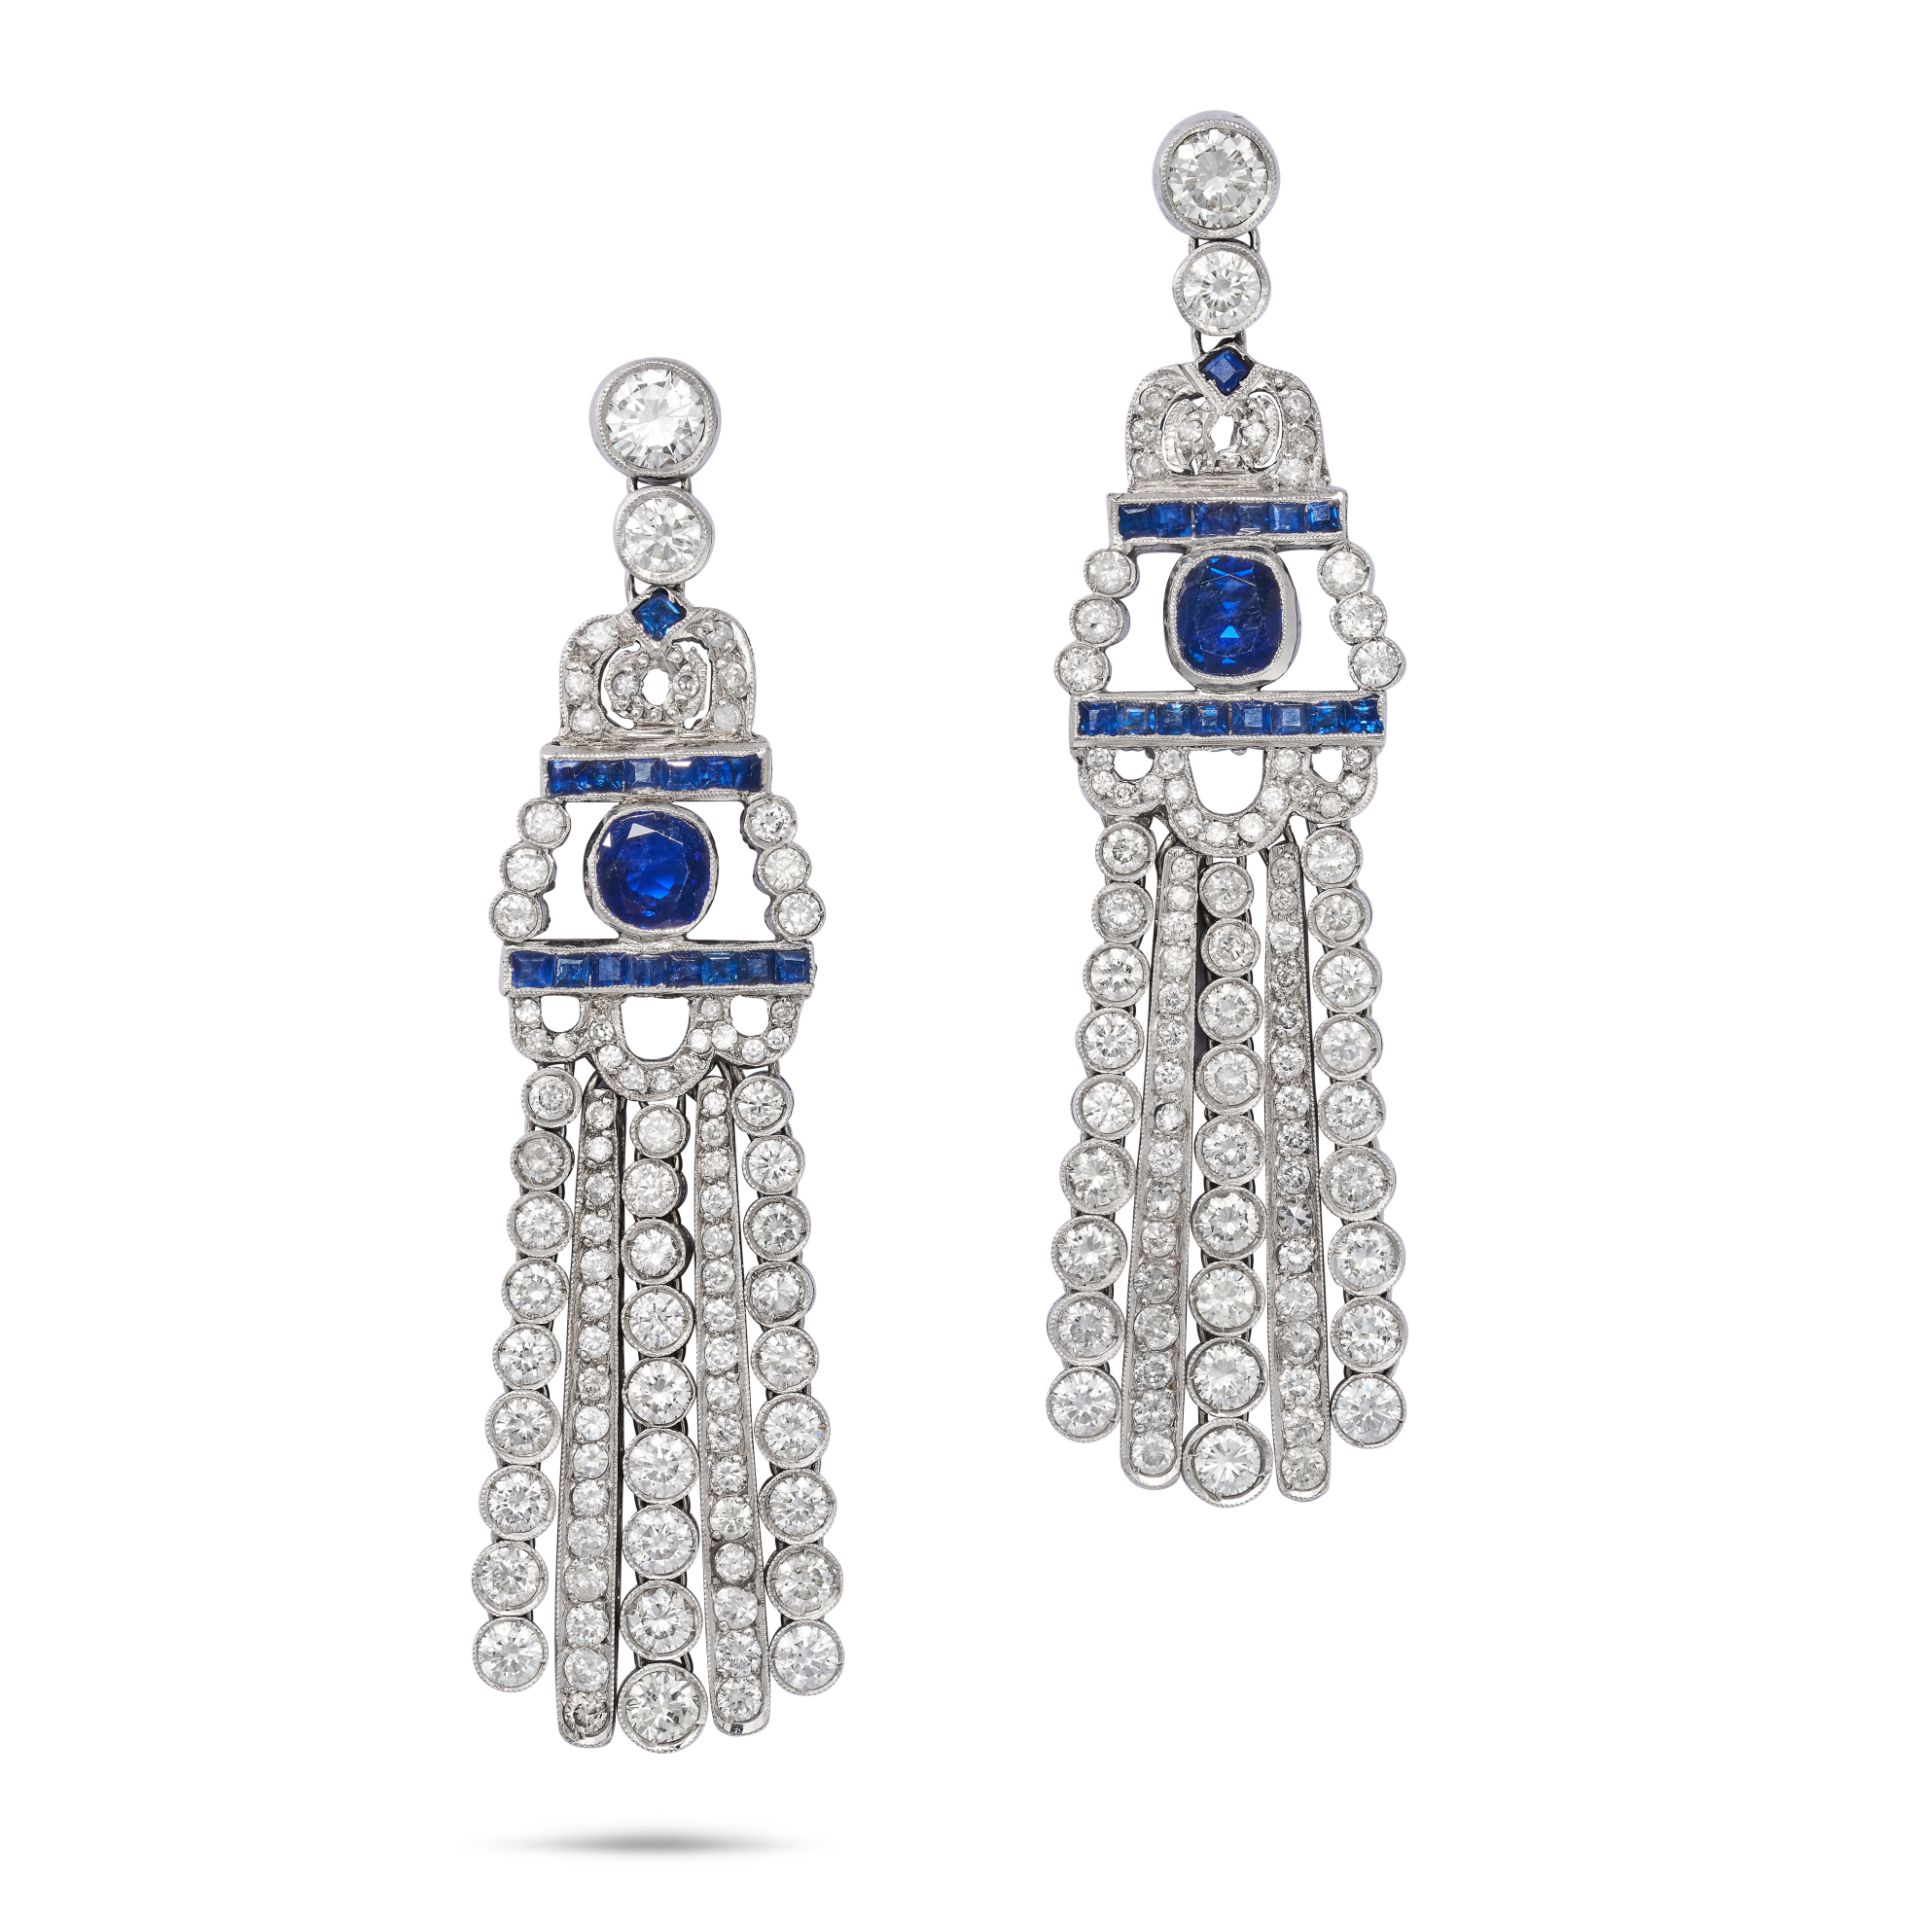 A PAIR OF SAPPHIRE AND DIAMOND TASSEL DROP EARRINGS in platinum, set throughout with round brilli...